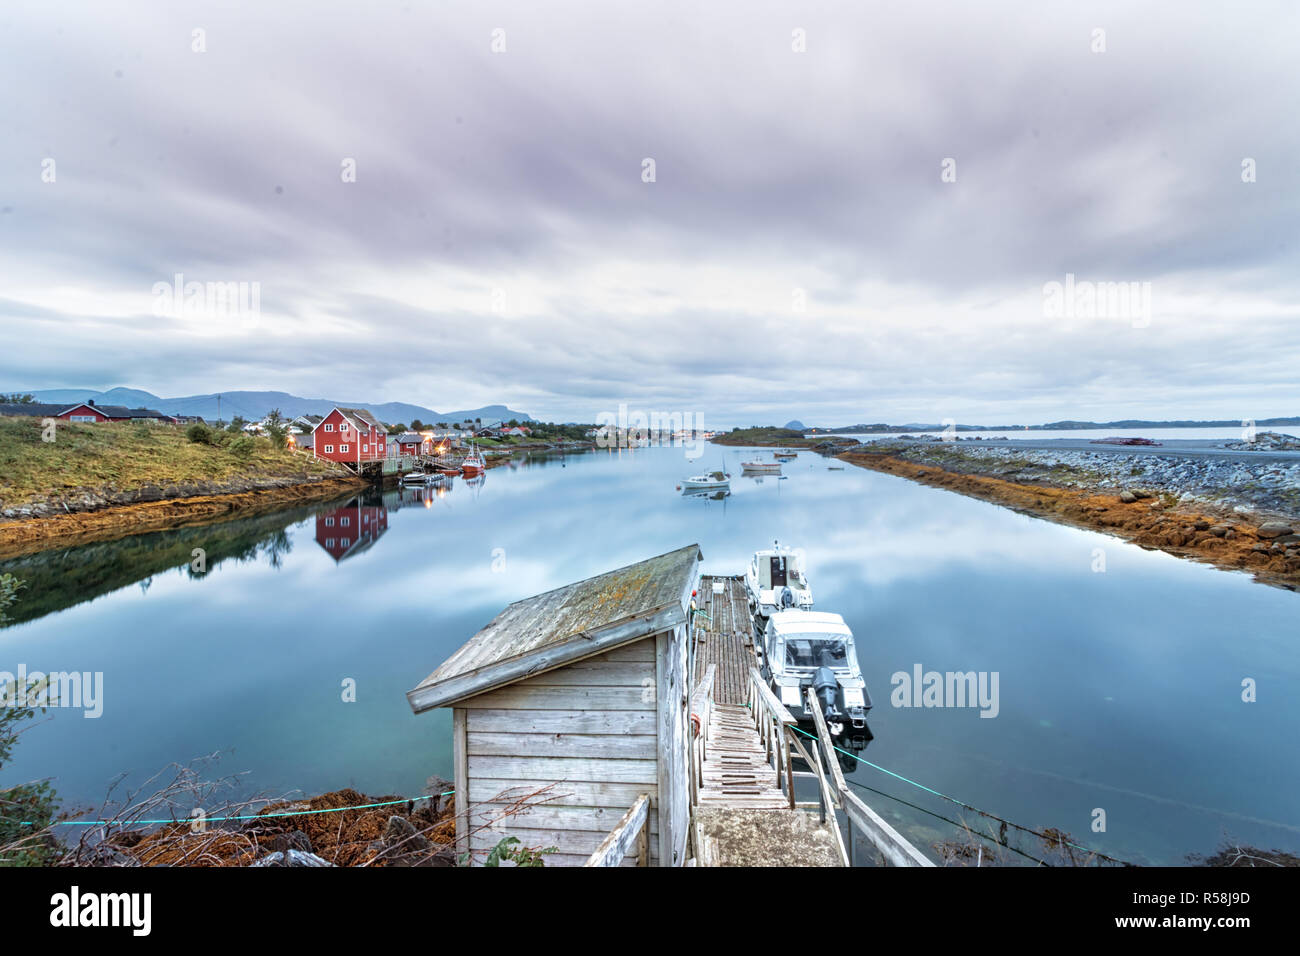 View of a small wooden dock and wooden houses next to the main Port of Bronnoysund in Norway. Stock Photo